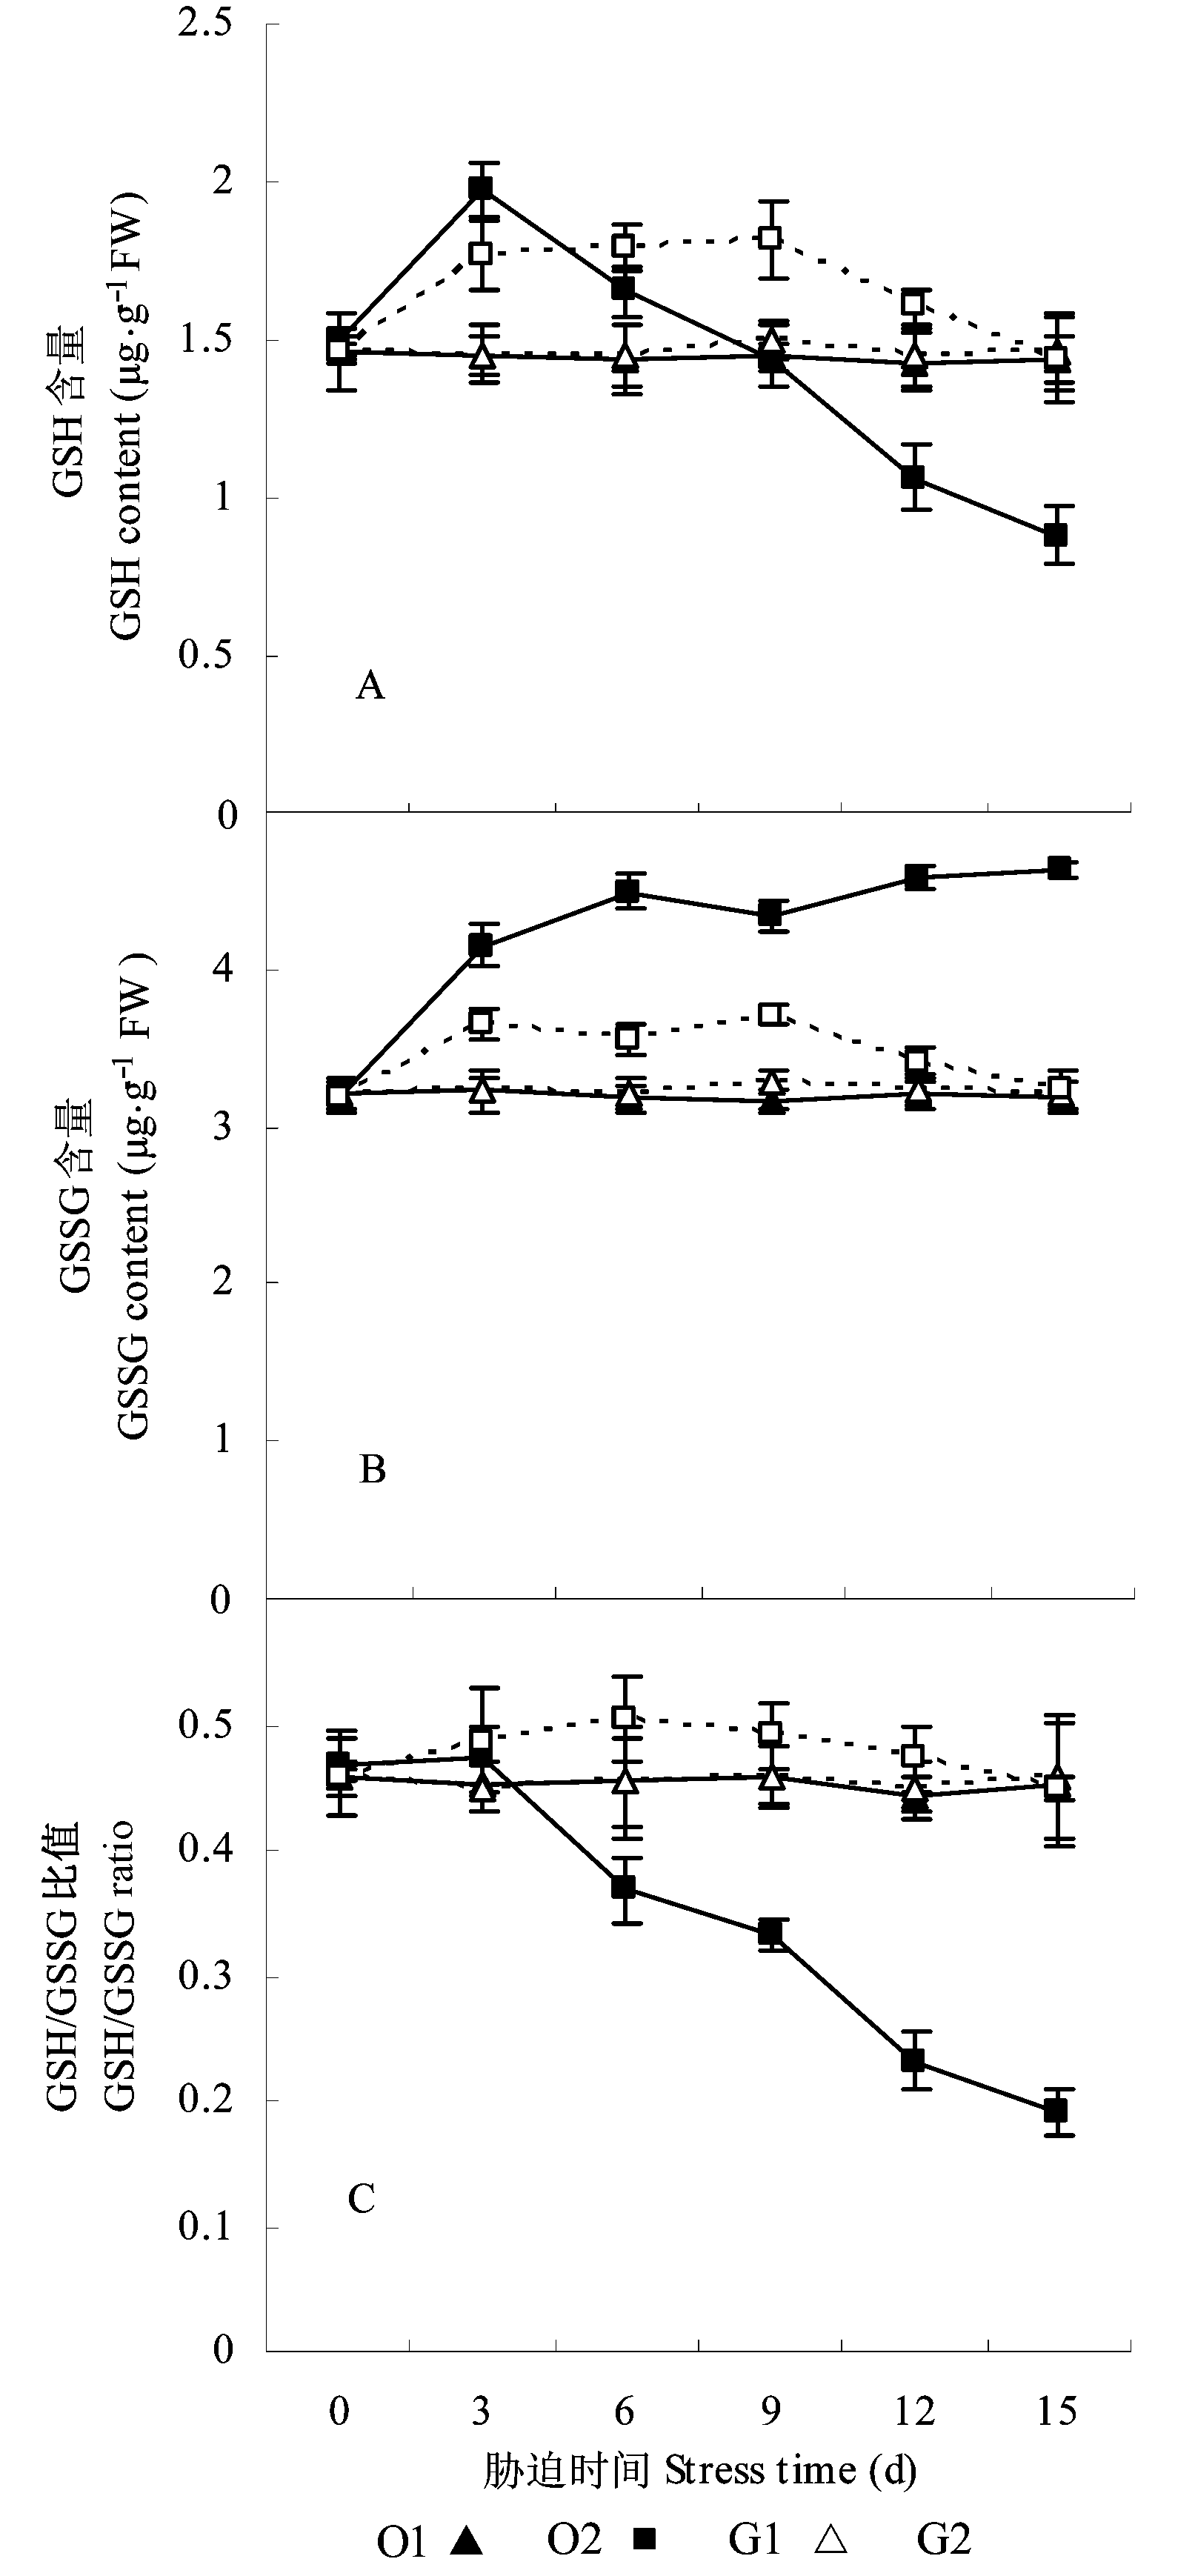 EFFECTS OF CALCIUM NITRATE STRESS ON ASCORBATE-GLUTATHIONE CYCLE 